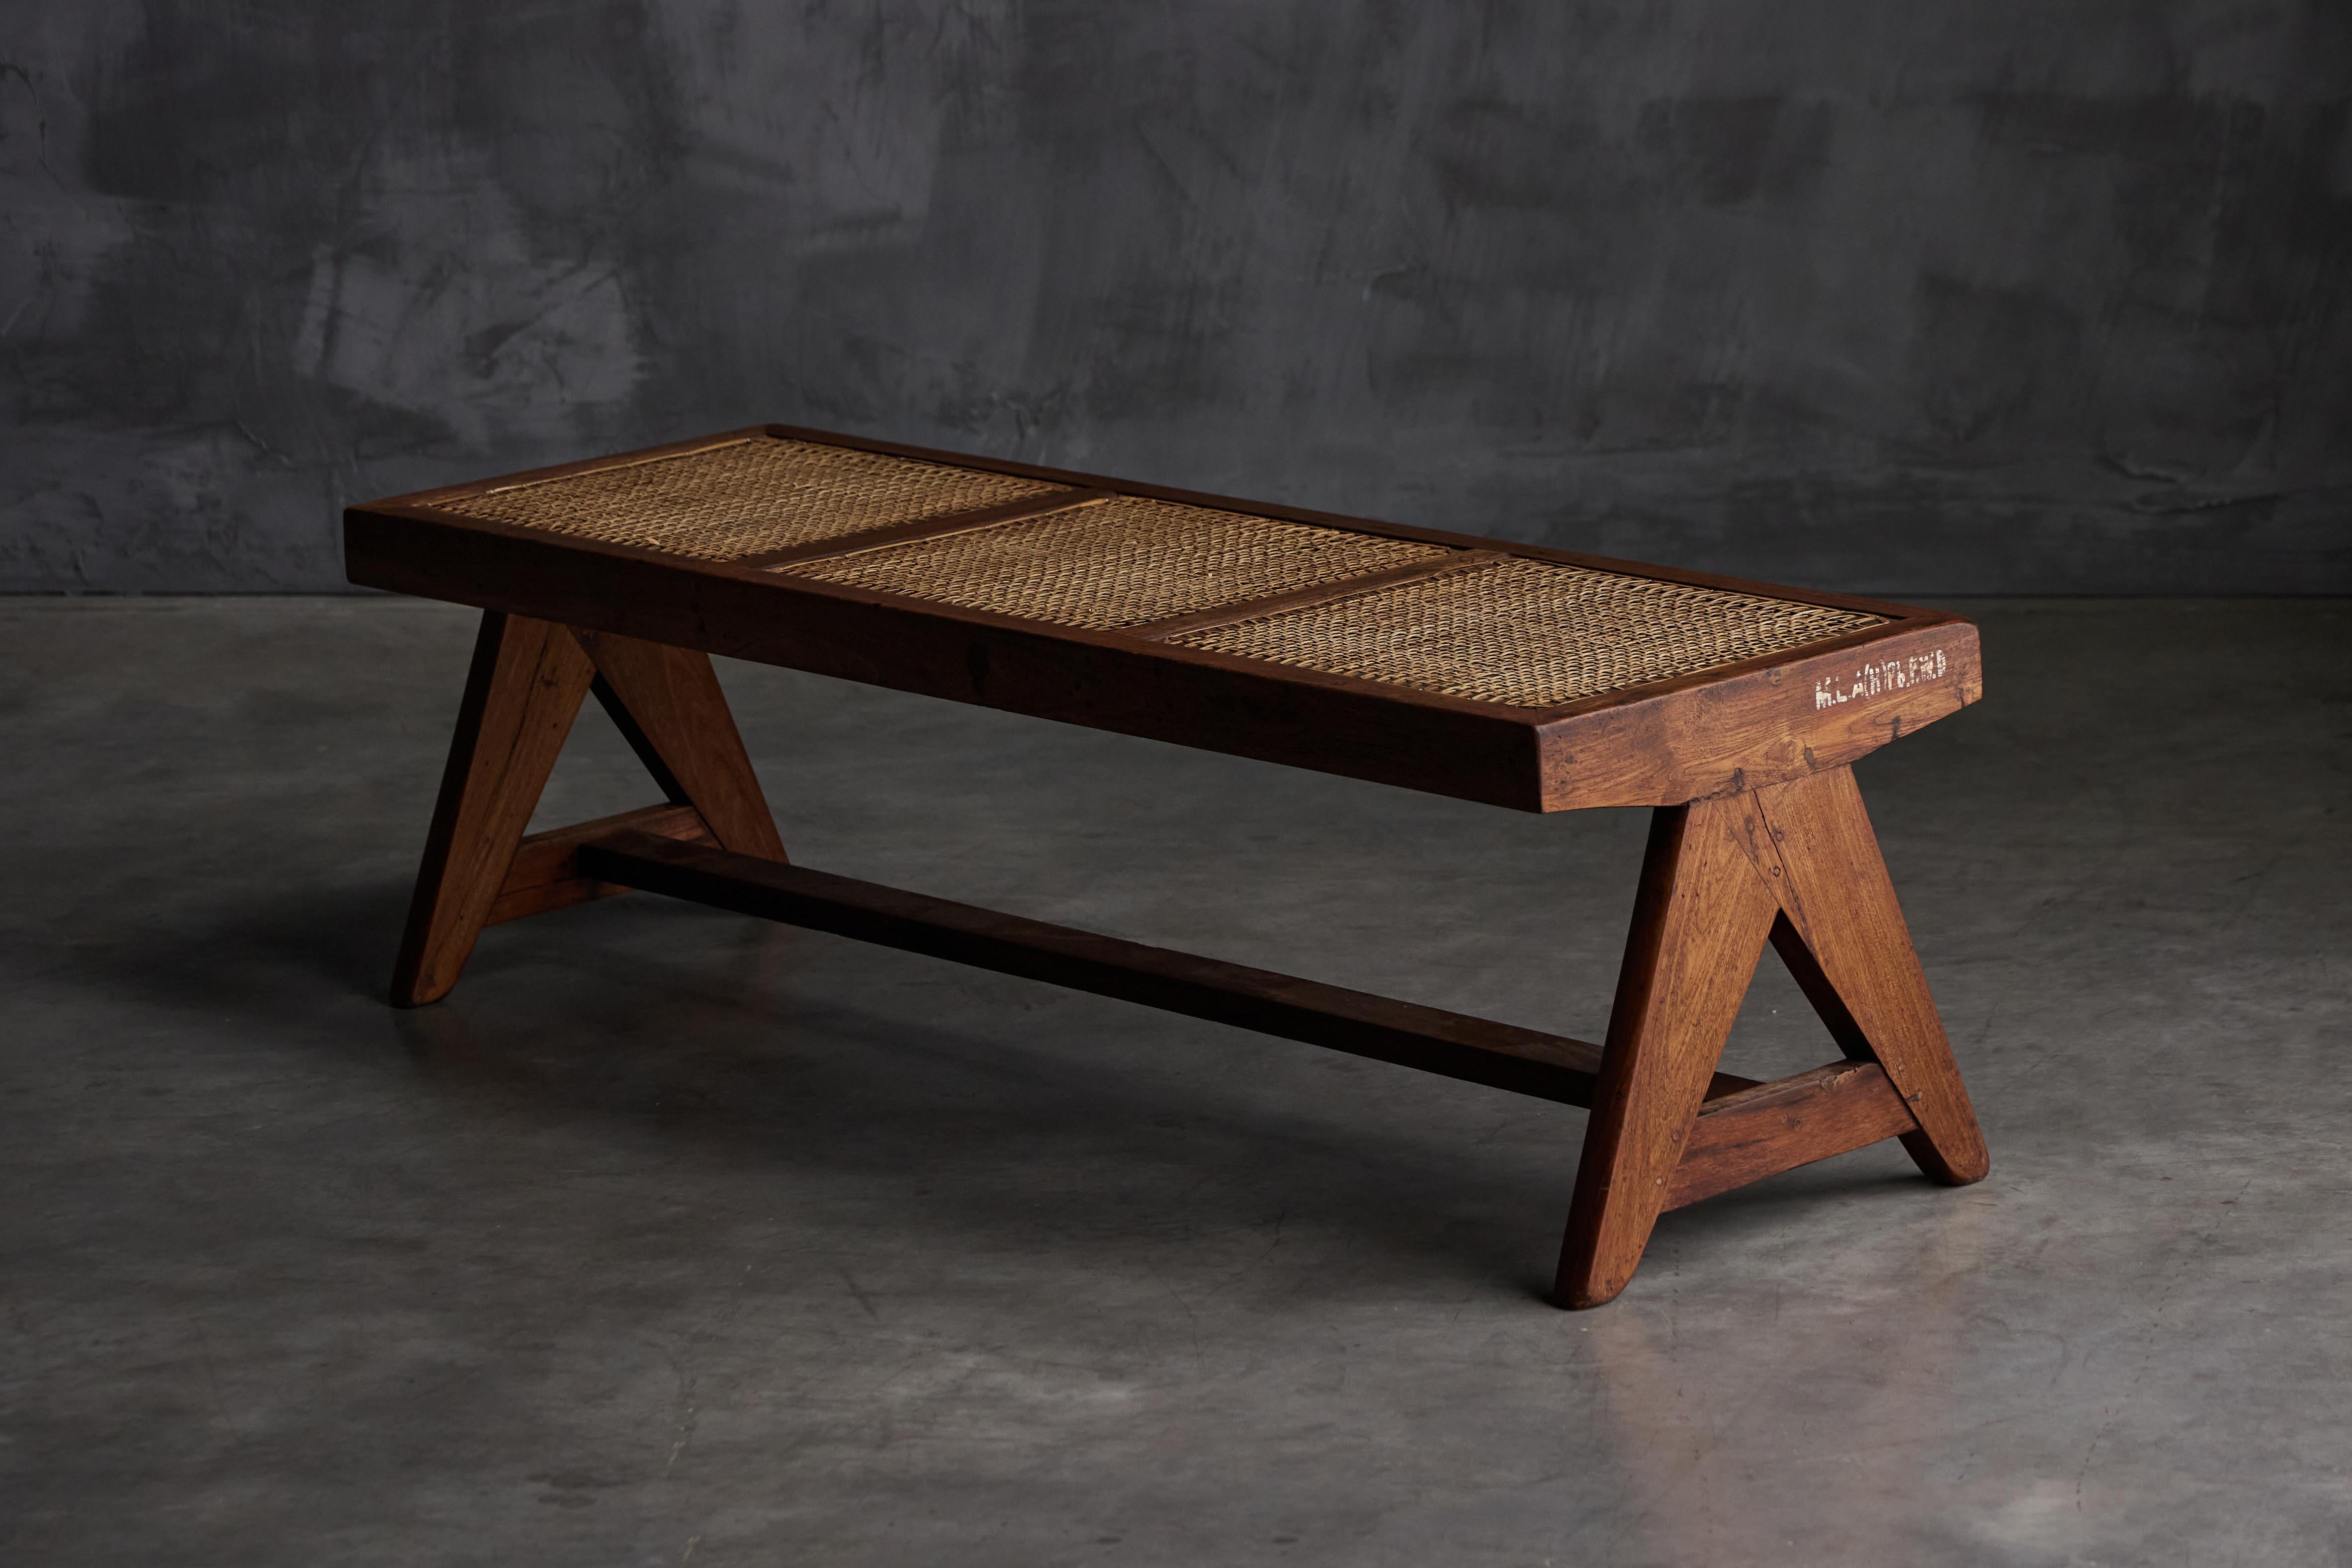 Pierre Jeanneret rectangular PJ-SI-33B bench in teak and cane, designed in the 1950s for the M.L.A. hostels in Chandigarh, India. The cane tabletop is supported by a pair of V-shaped legs, characteristic of Chandigarh creations. Its minimalist